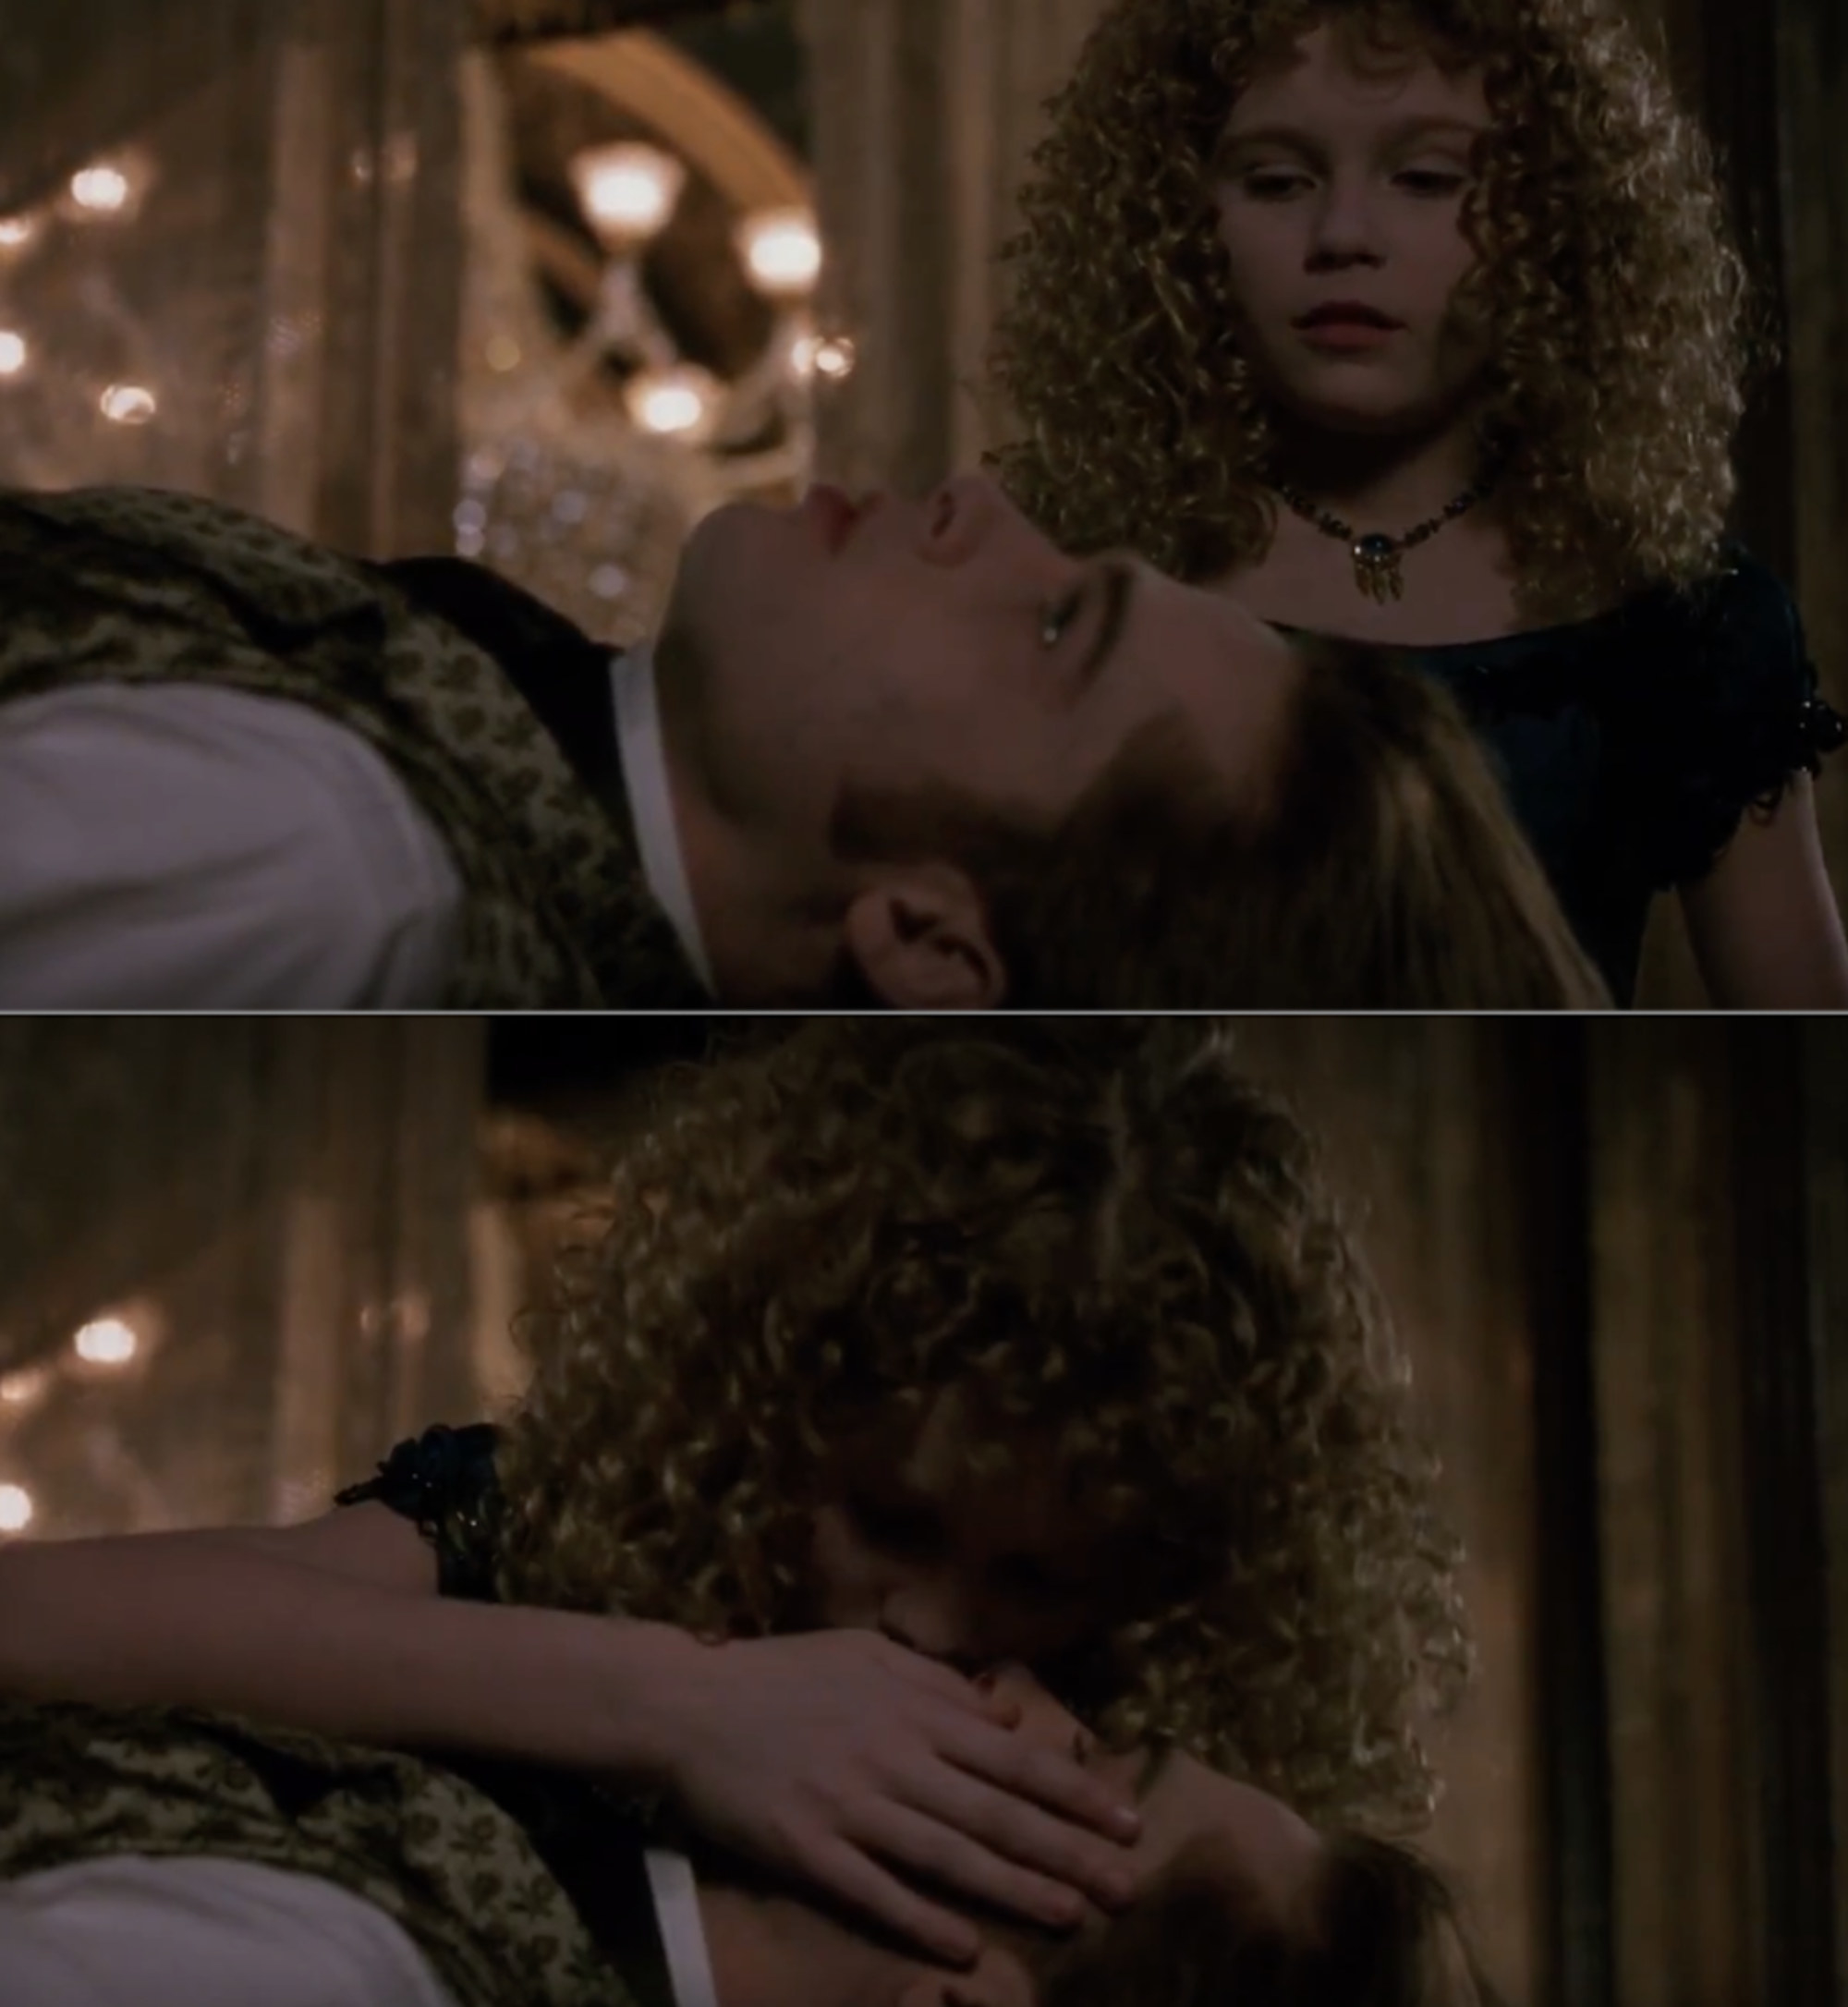 Kirsten kissing Brad in a scene from the moviee